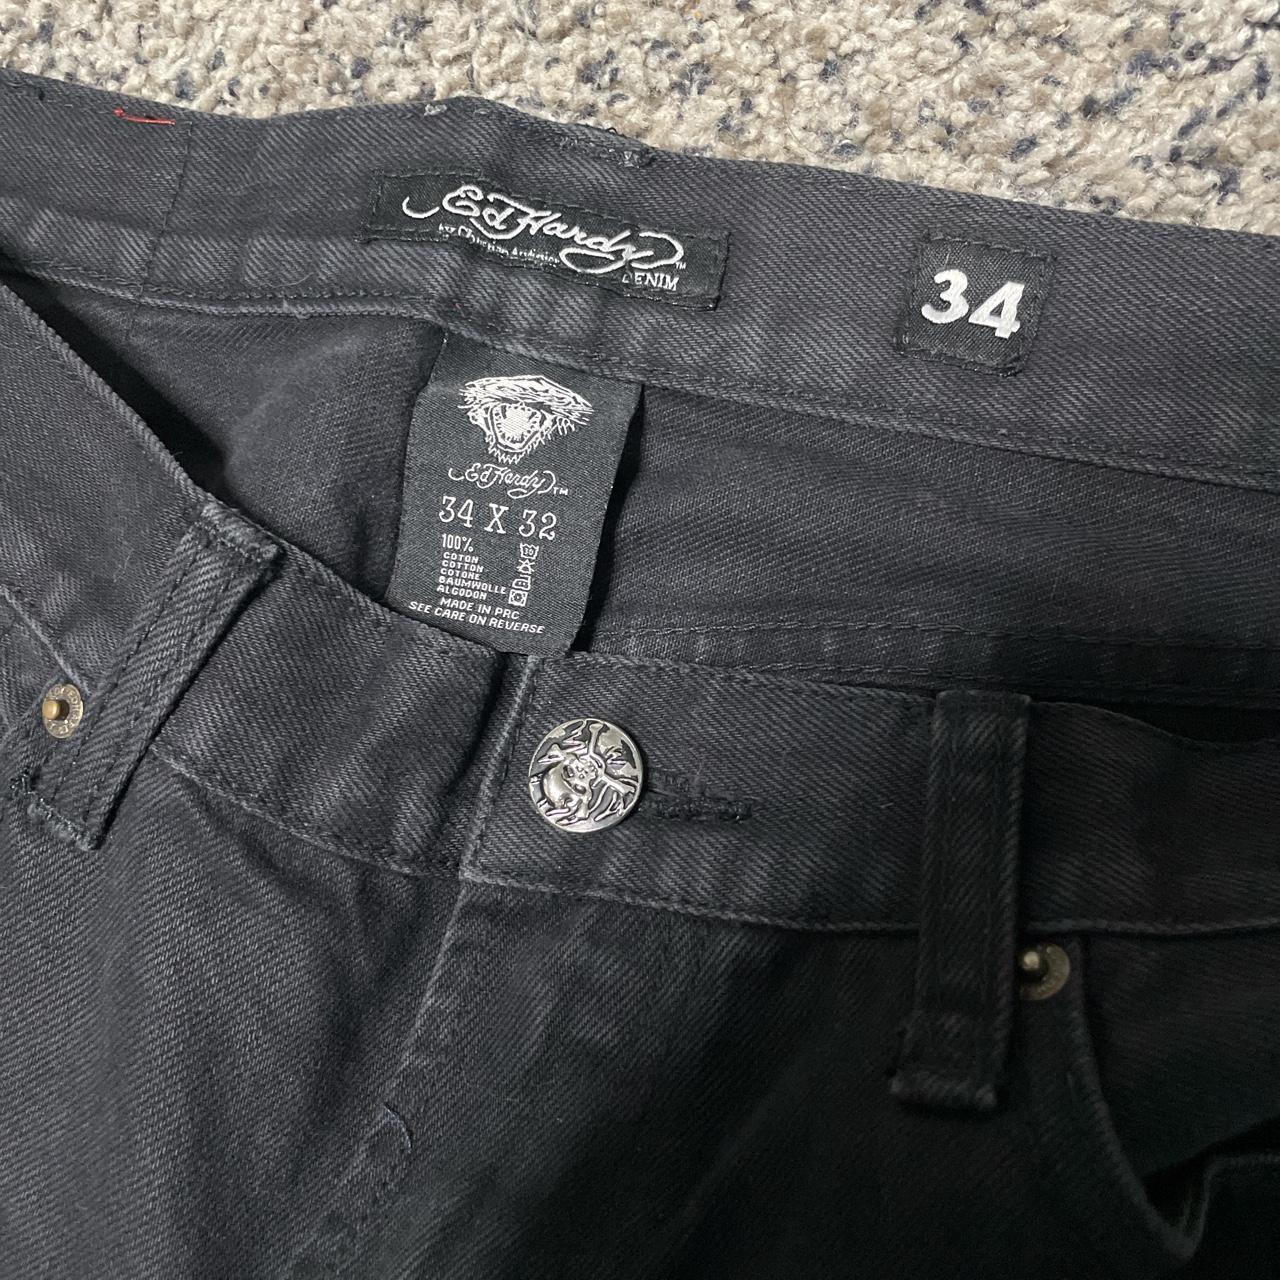 Black Ed Hardy jeans size 34x32 But they actually... - Depop